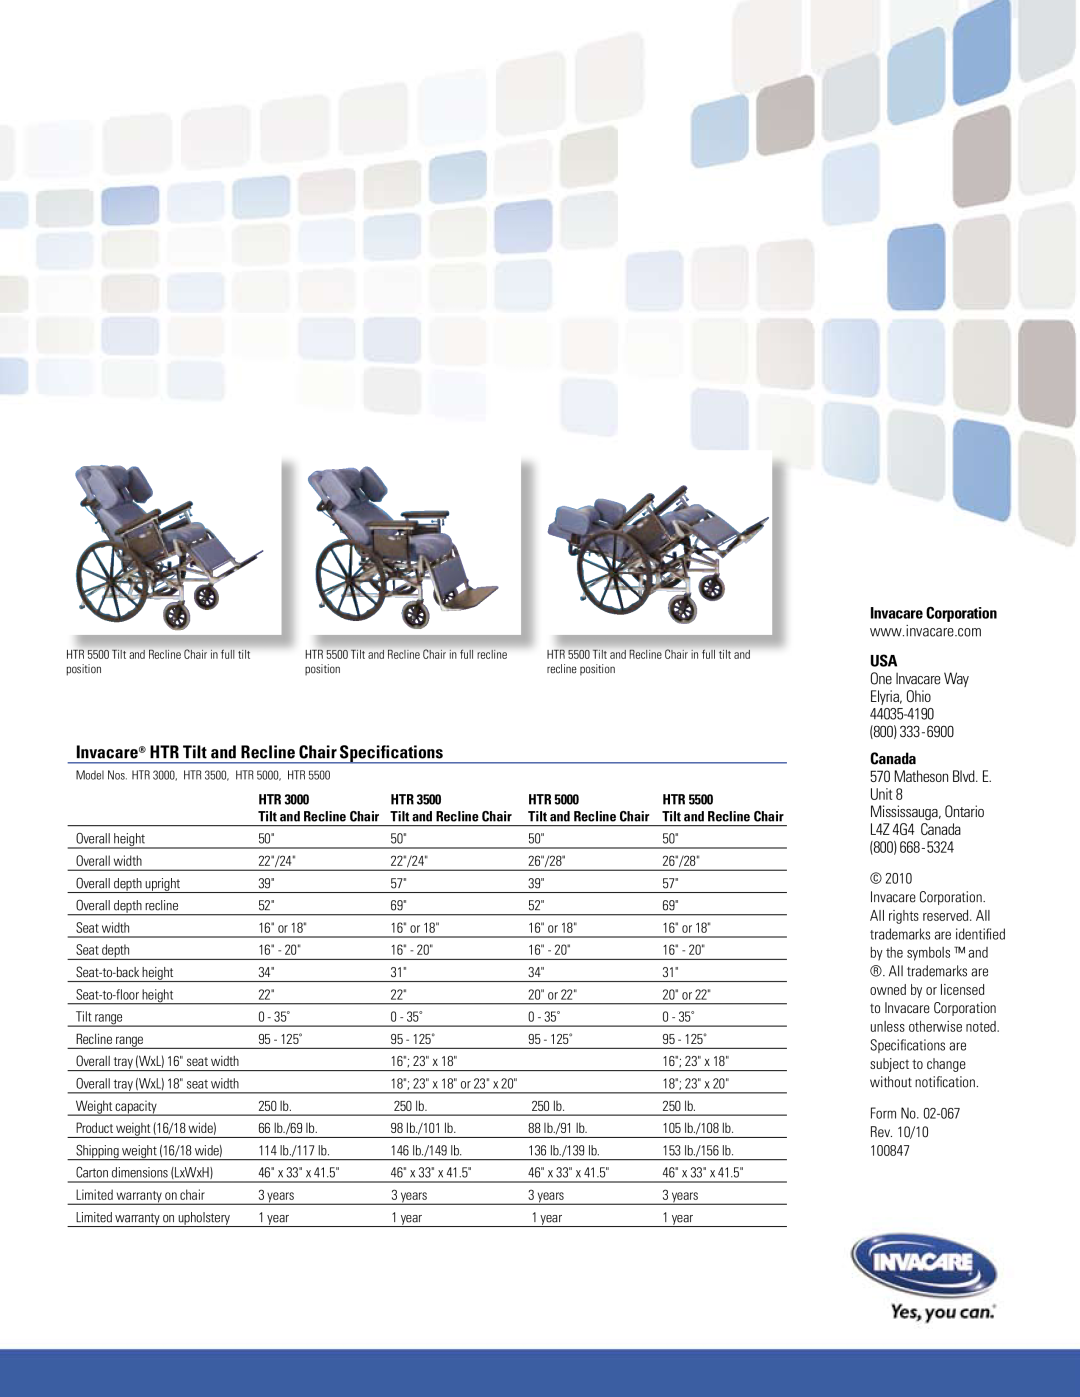 Invacare HTR3000 manual Invacare HTR Tilt and Recline Chair Specifications, Invacare Corporation, Canada 